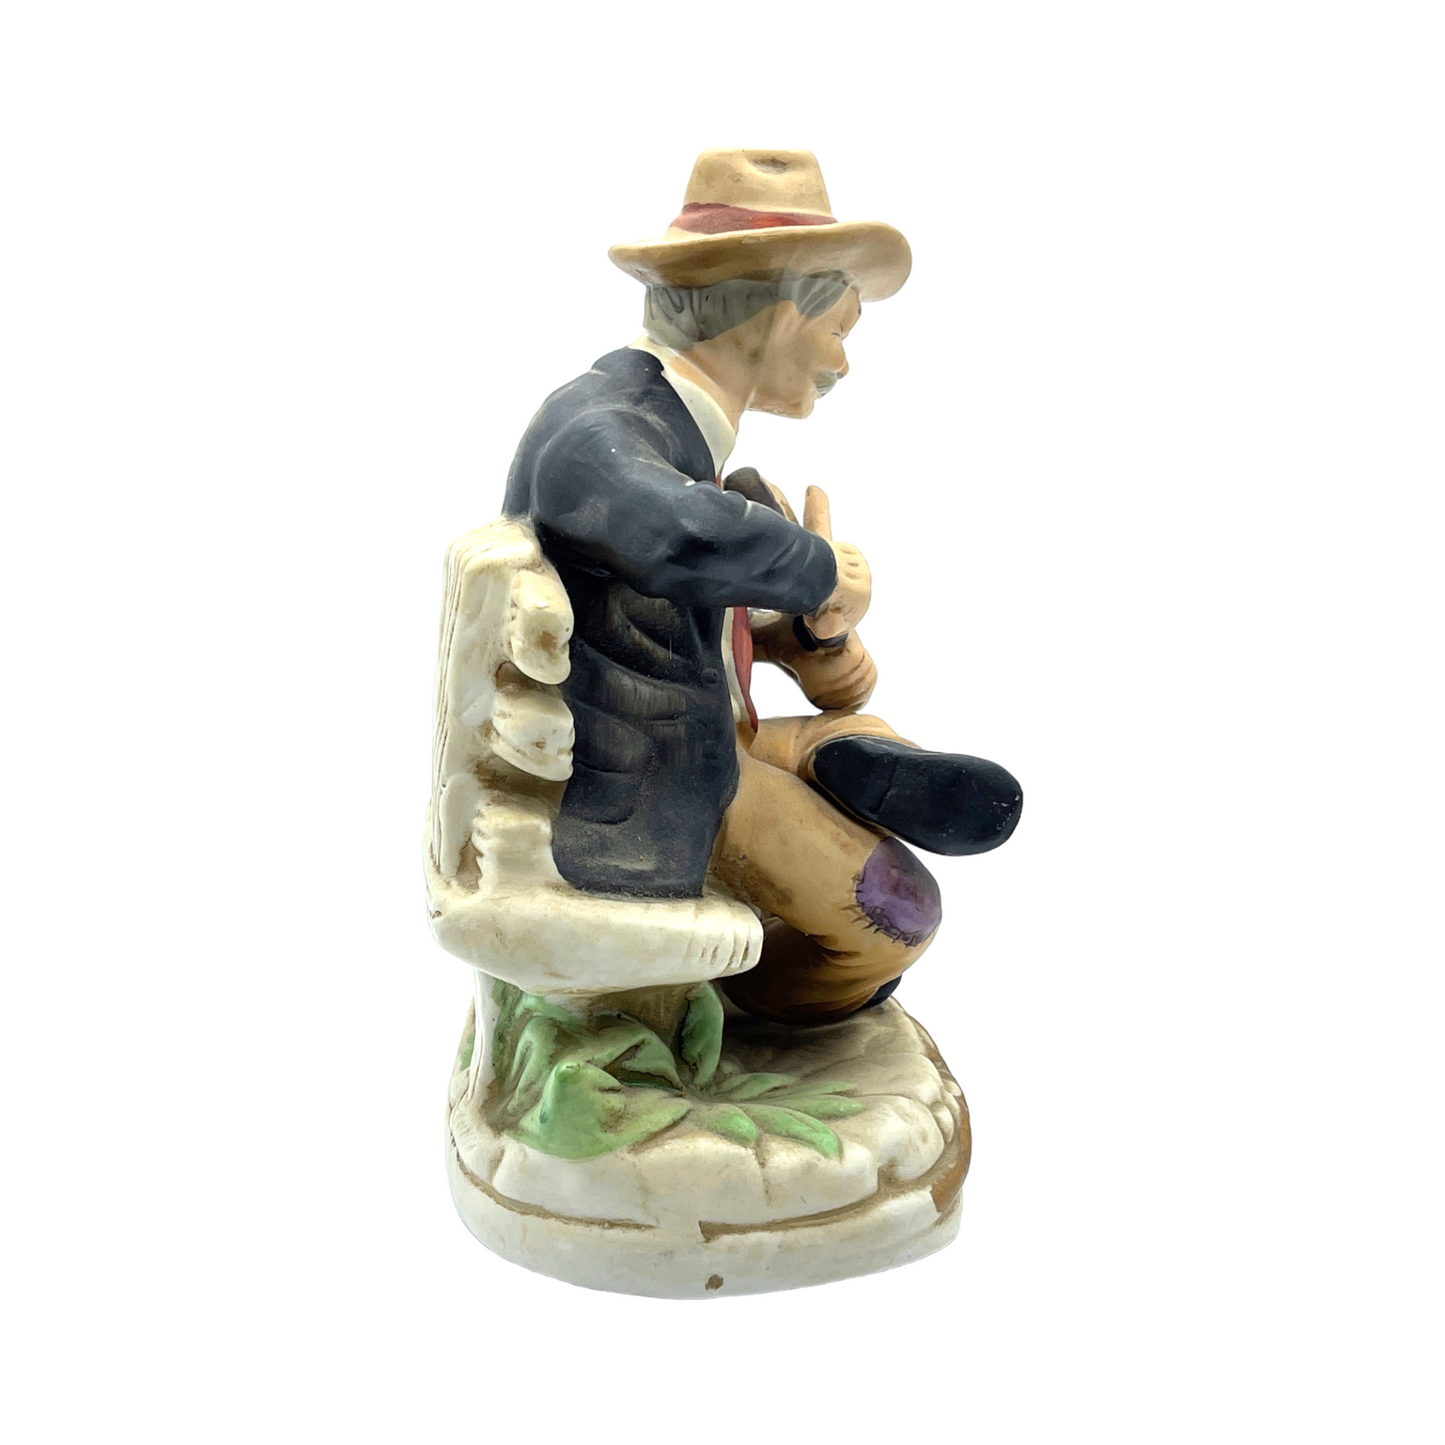 Homco Porcelain - Man Playing Fiddle With Dog Figurine - Vintage